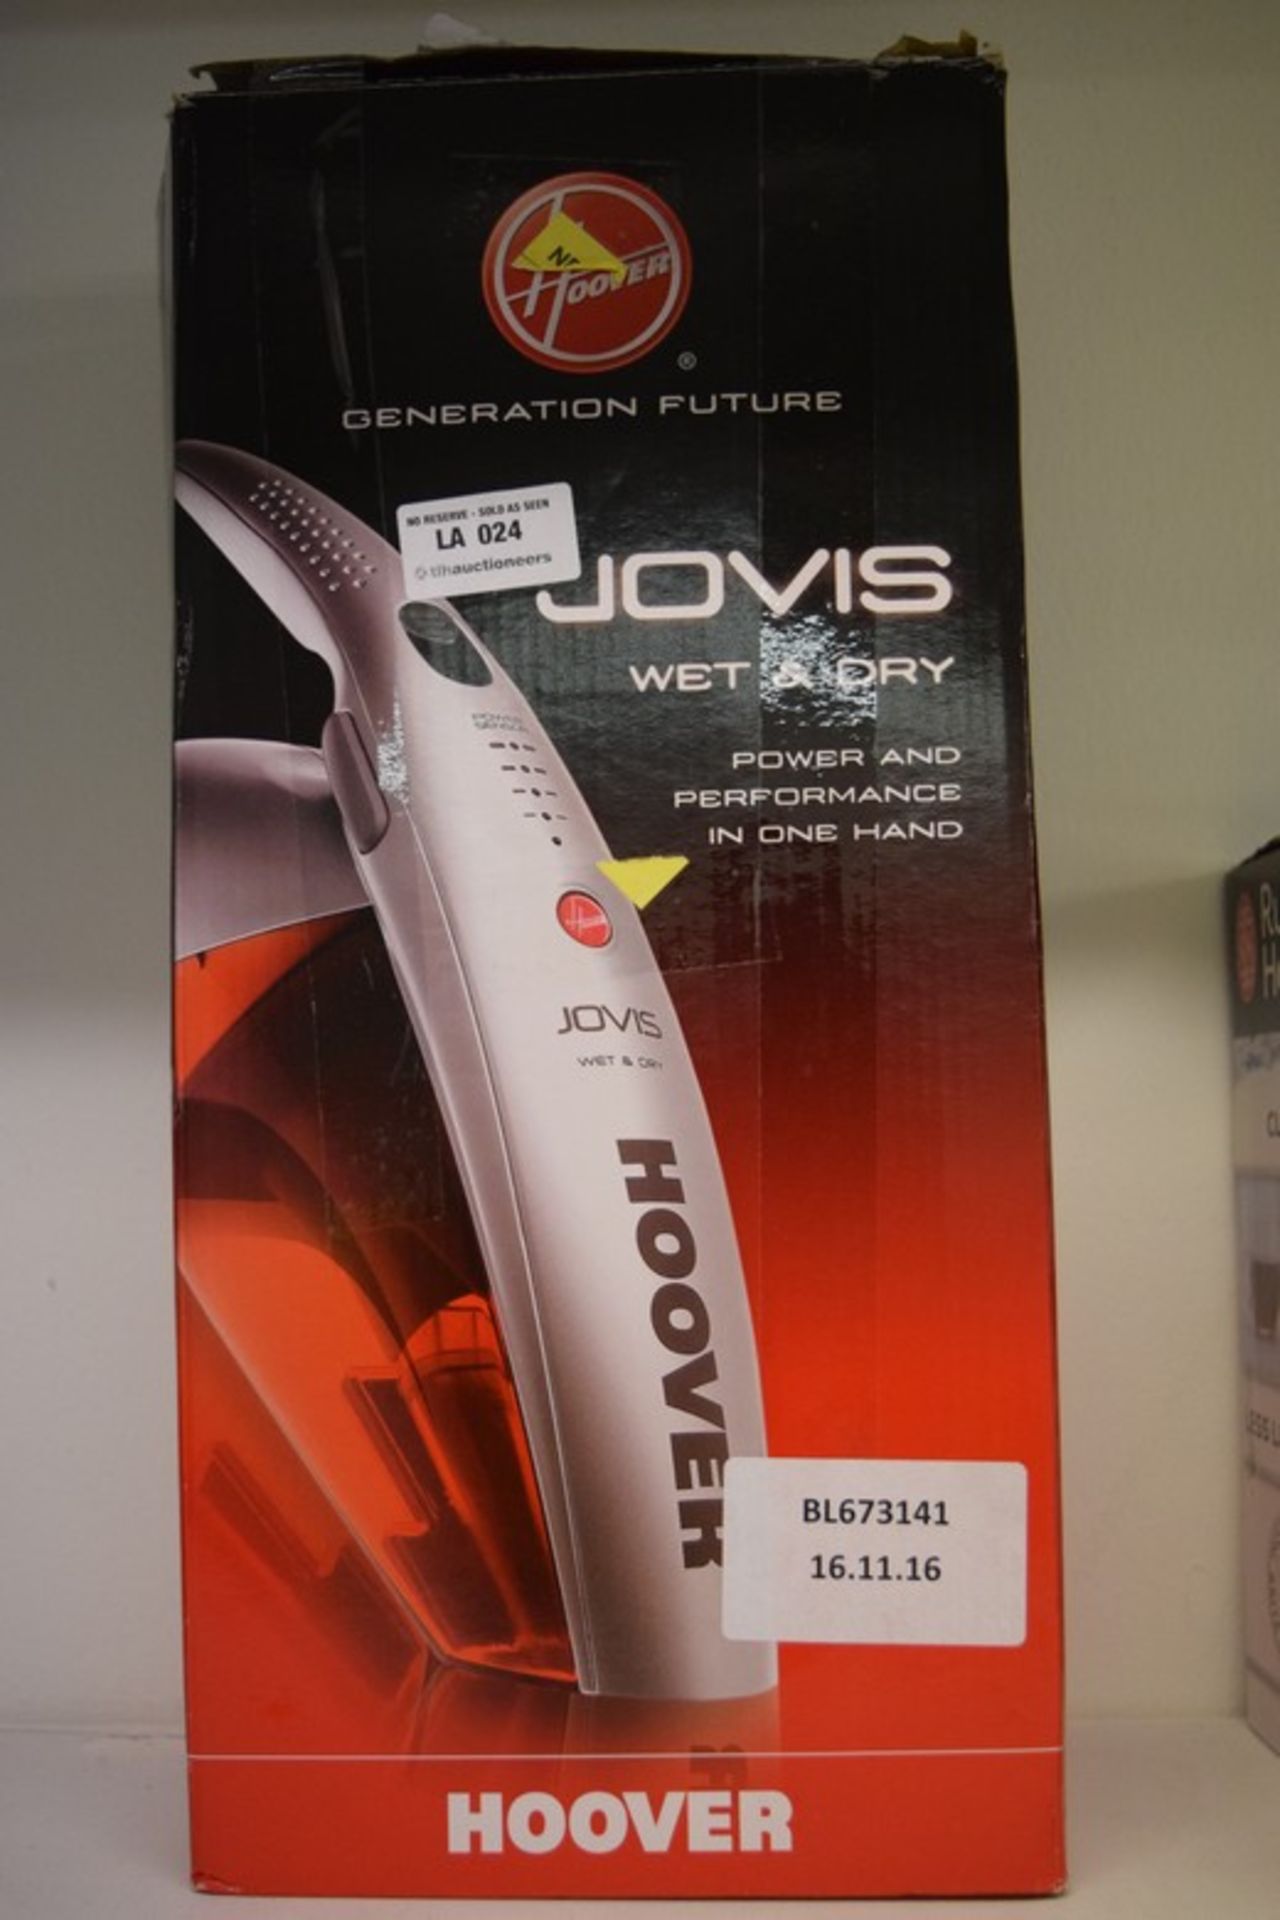 1 x BOXED HOOVER JOVIS WET AND DRY POWER VAC RRP £35 16/11/16 *PLEASE NOTE THAT THE BID PRICE IS